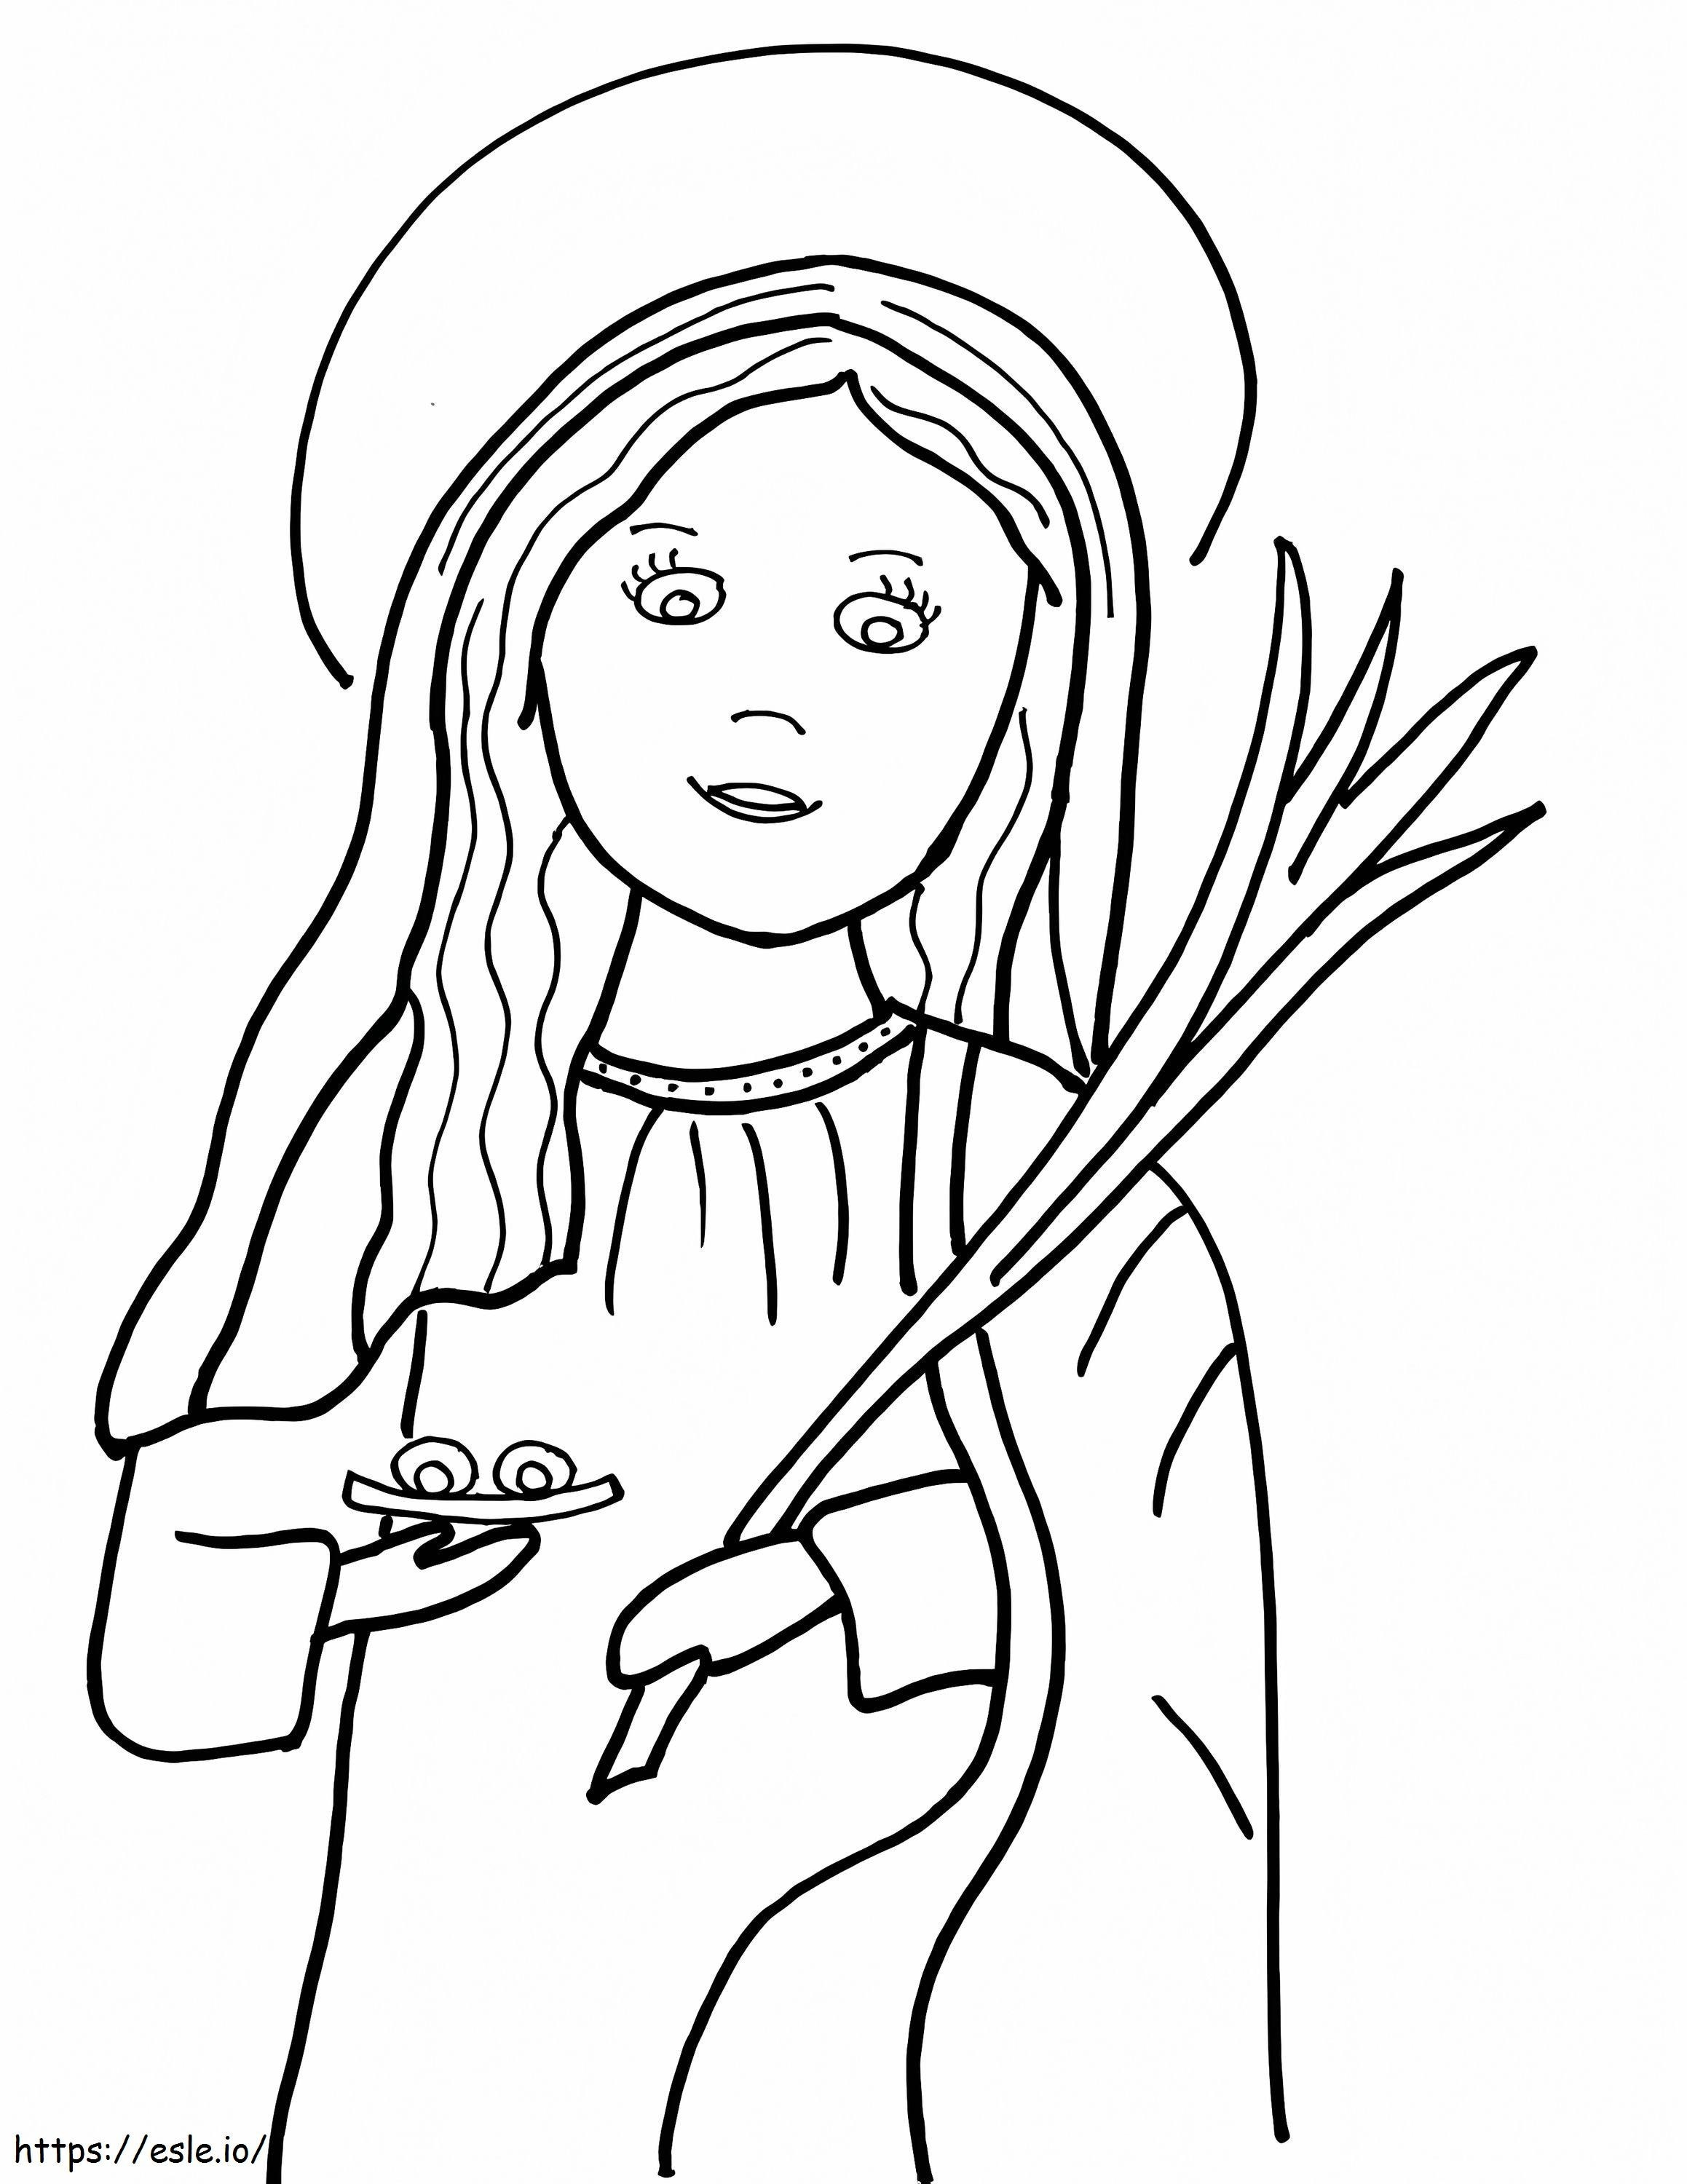 Saint Lucy 4 coloring page